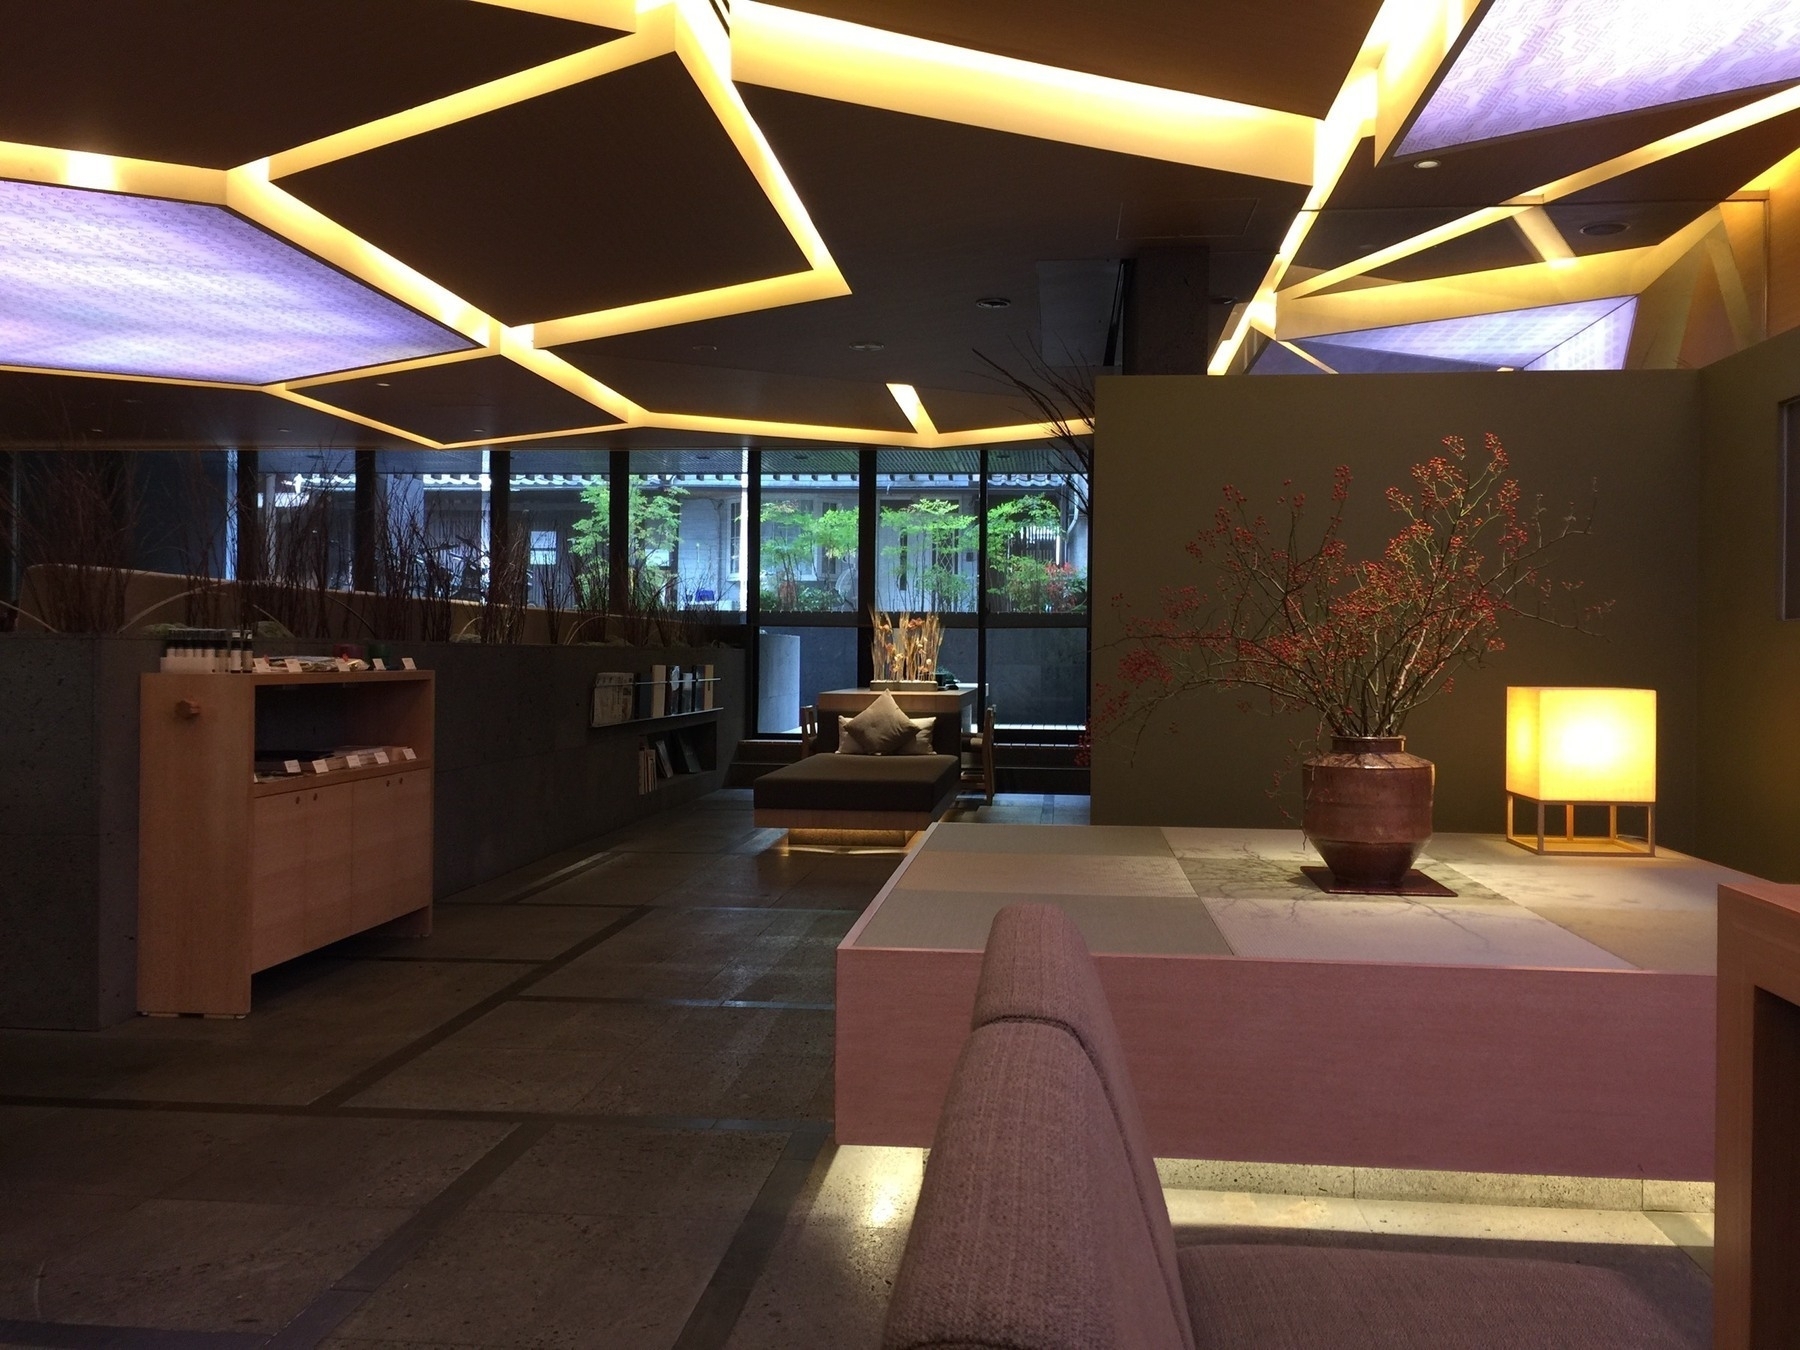 A hotel lobby somewhere in Kyoto with yellow neon lights built into the ceiling